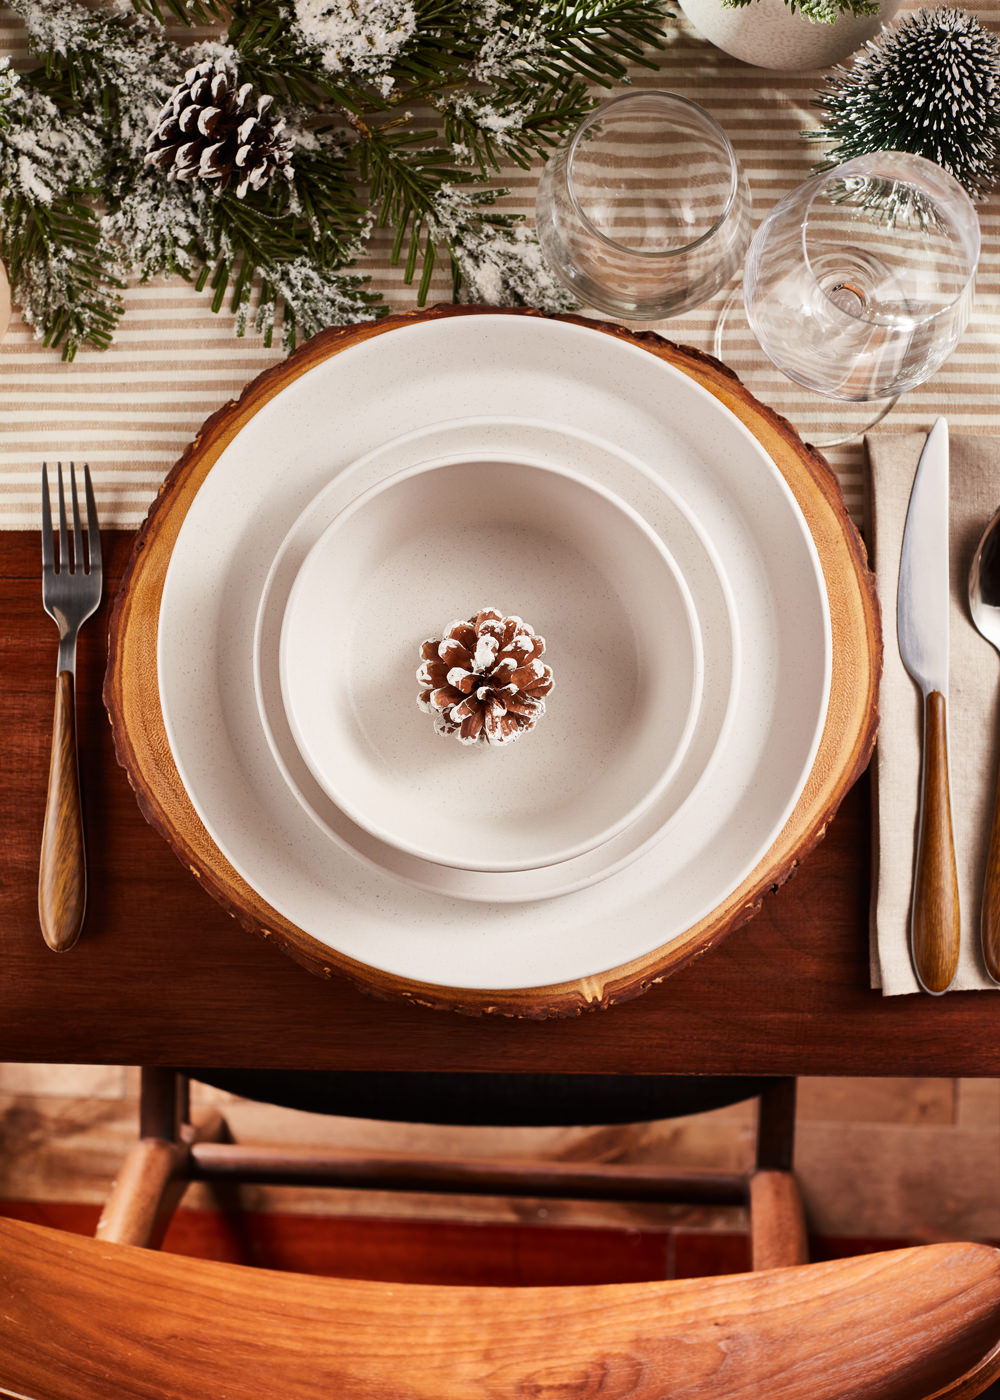 Christmas Dinner Table Photoshoot Idea by Foodivine